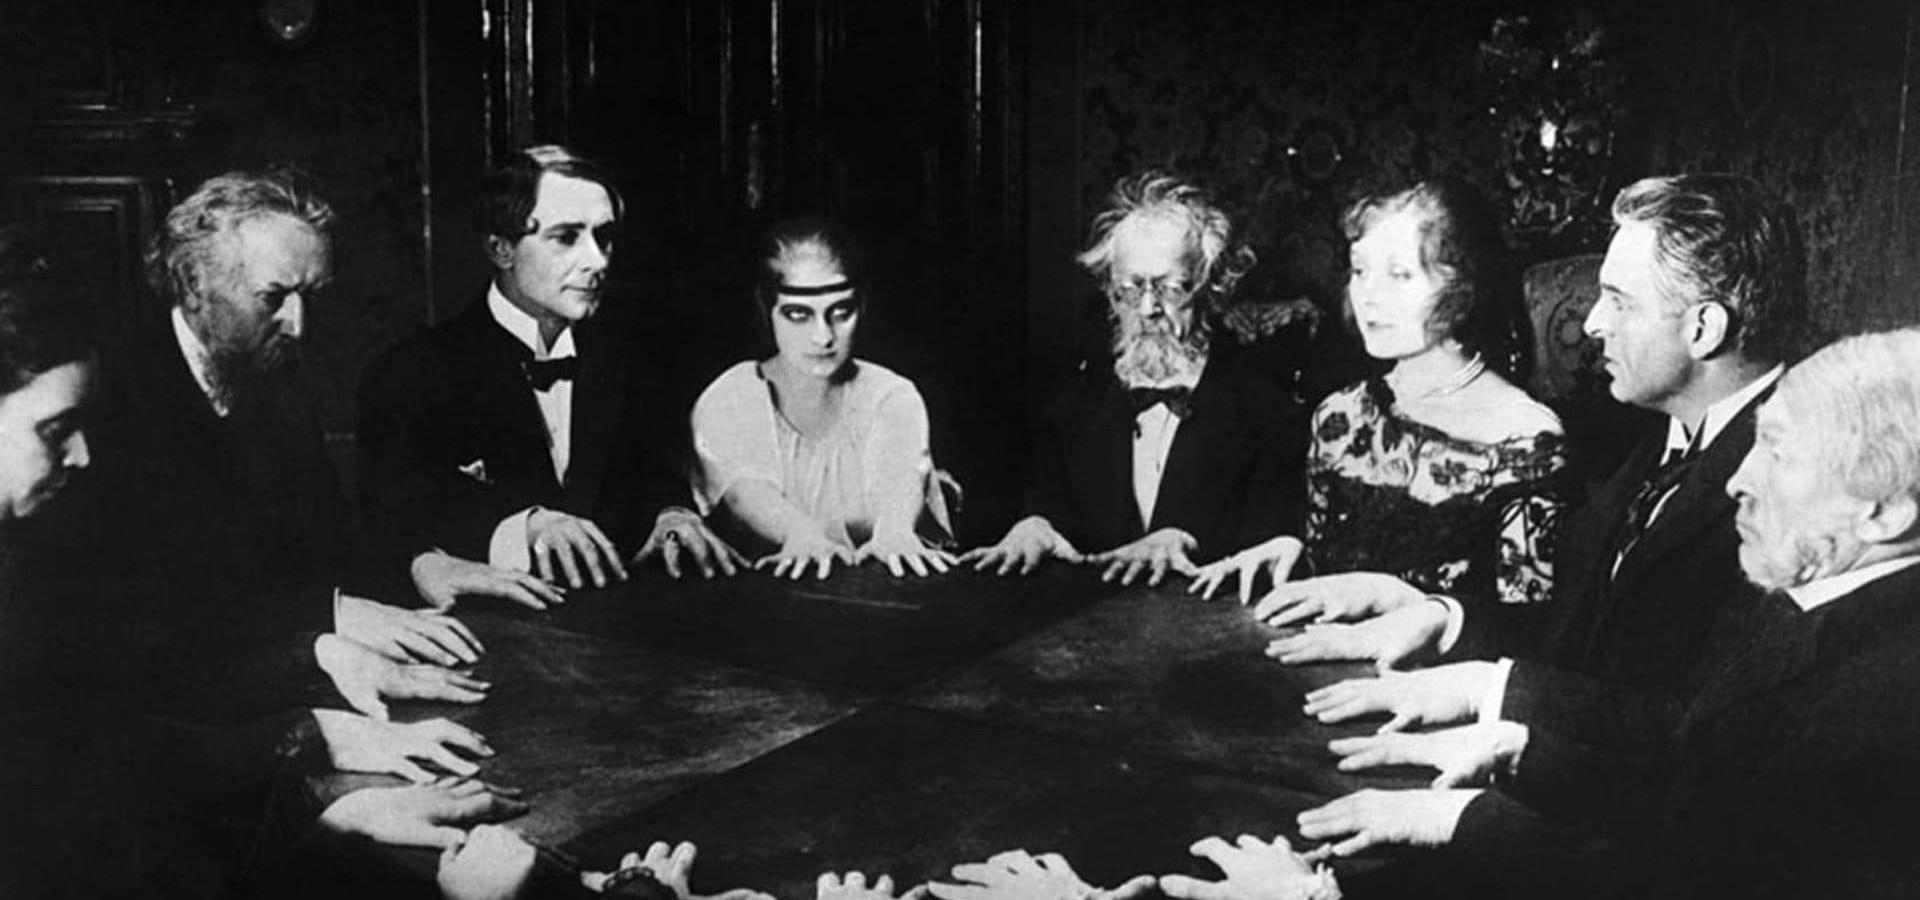 Dr Mabuse The Gambler 1922 Full Movie Online In Hd Quality